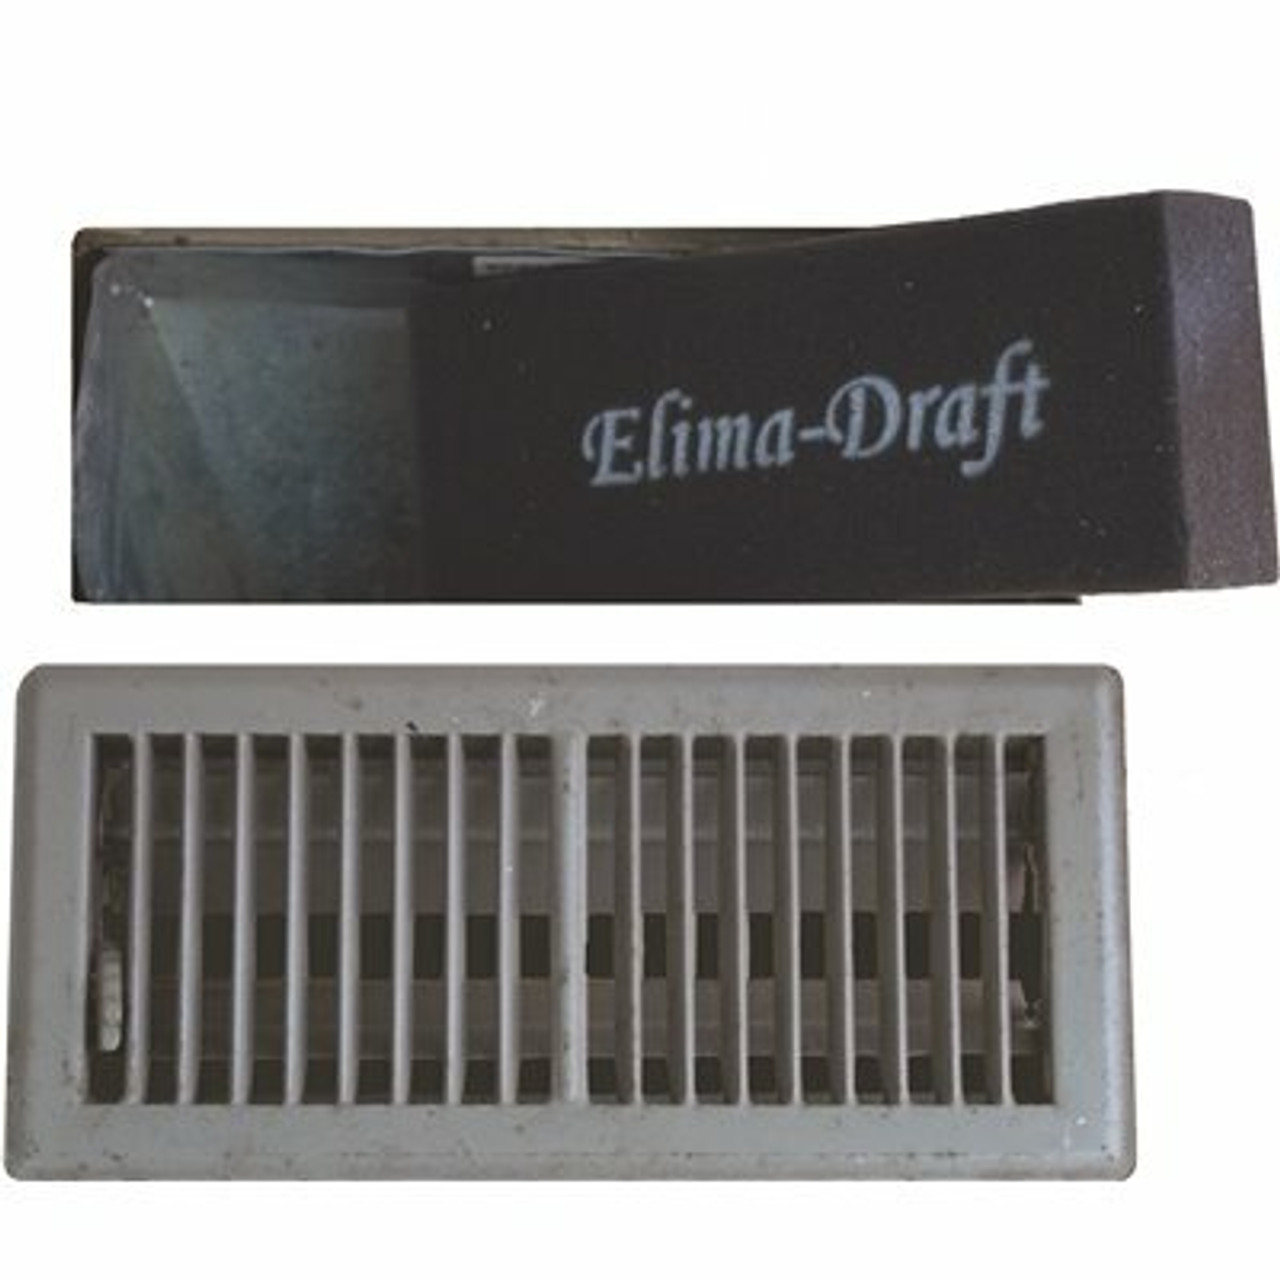 Elima-Draft 12 In. X 4 In. X 2 In. Floor Ducts Residential And Commercial Hvac Insulated Floor Insert